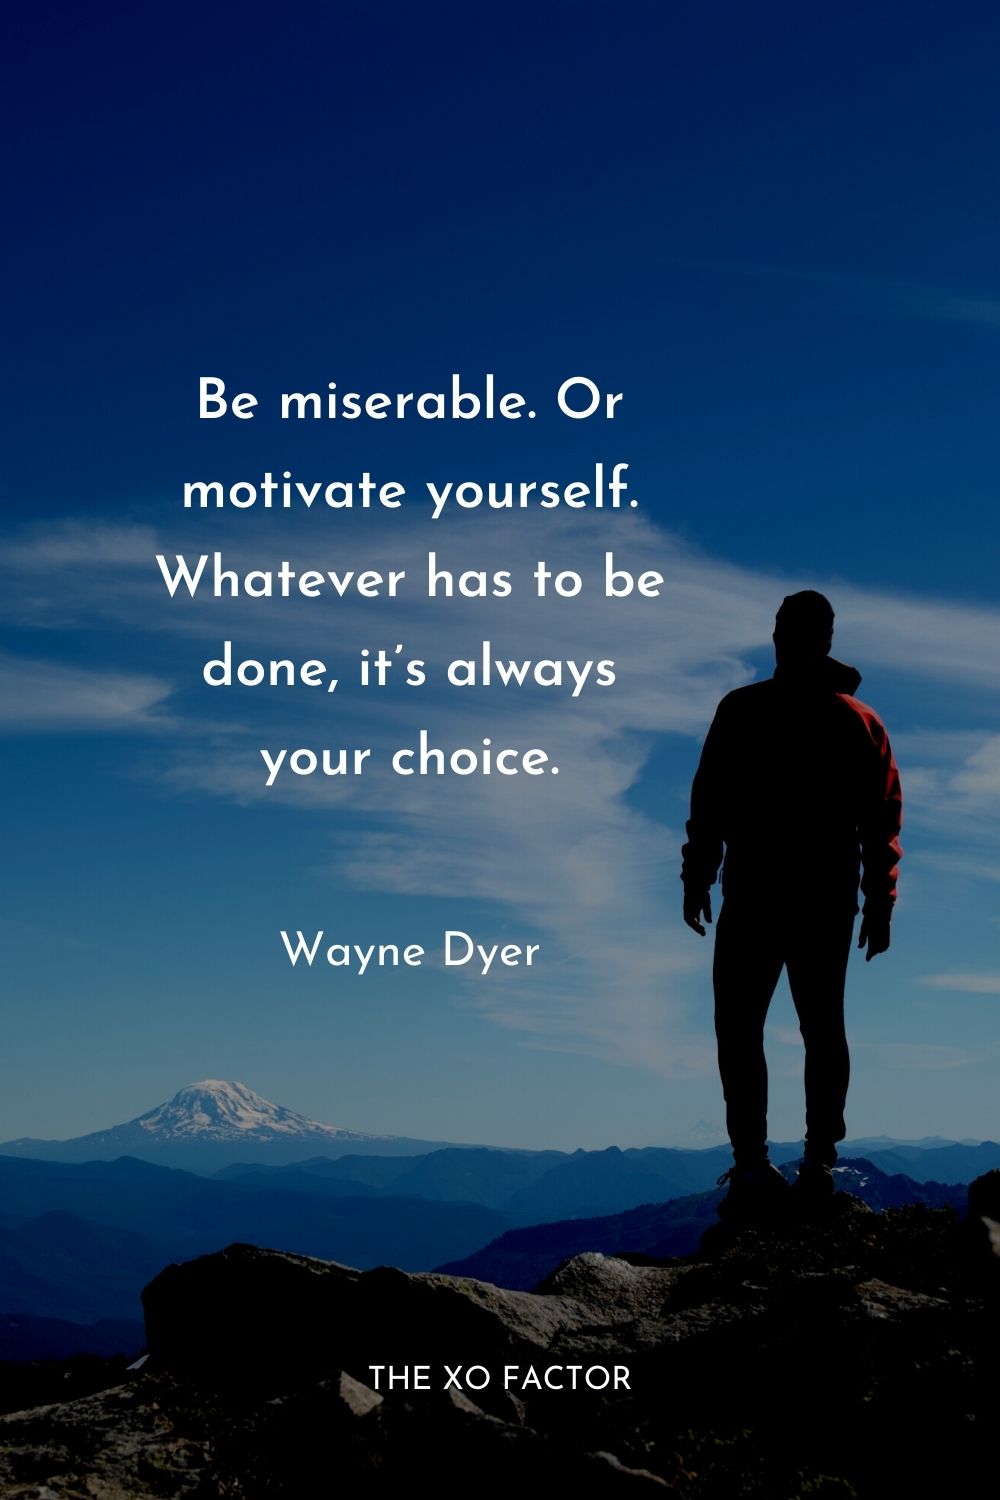 Be miserable. Or motivate yourself. Whatever has to be done, it’s always your choice.